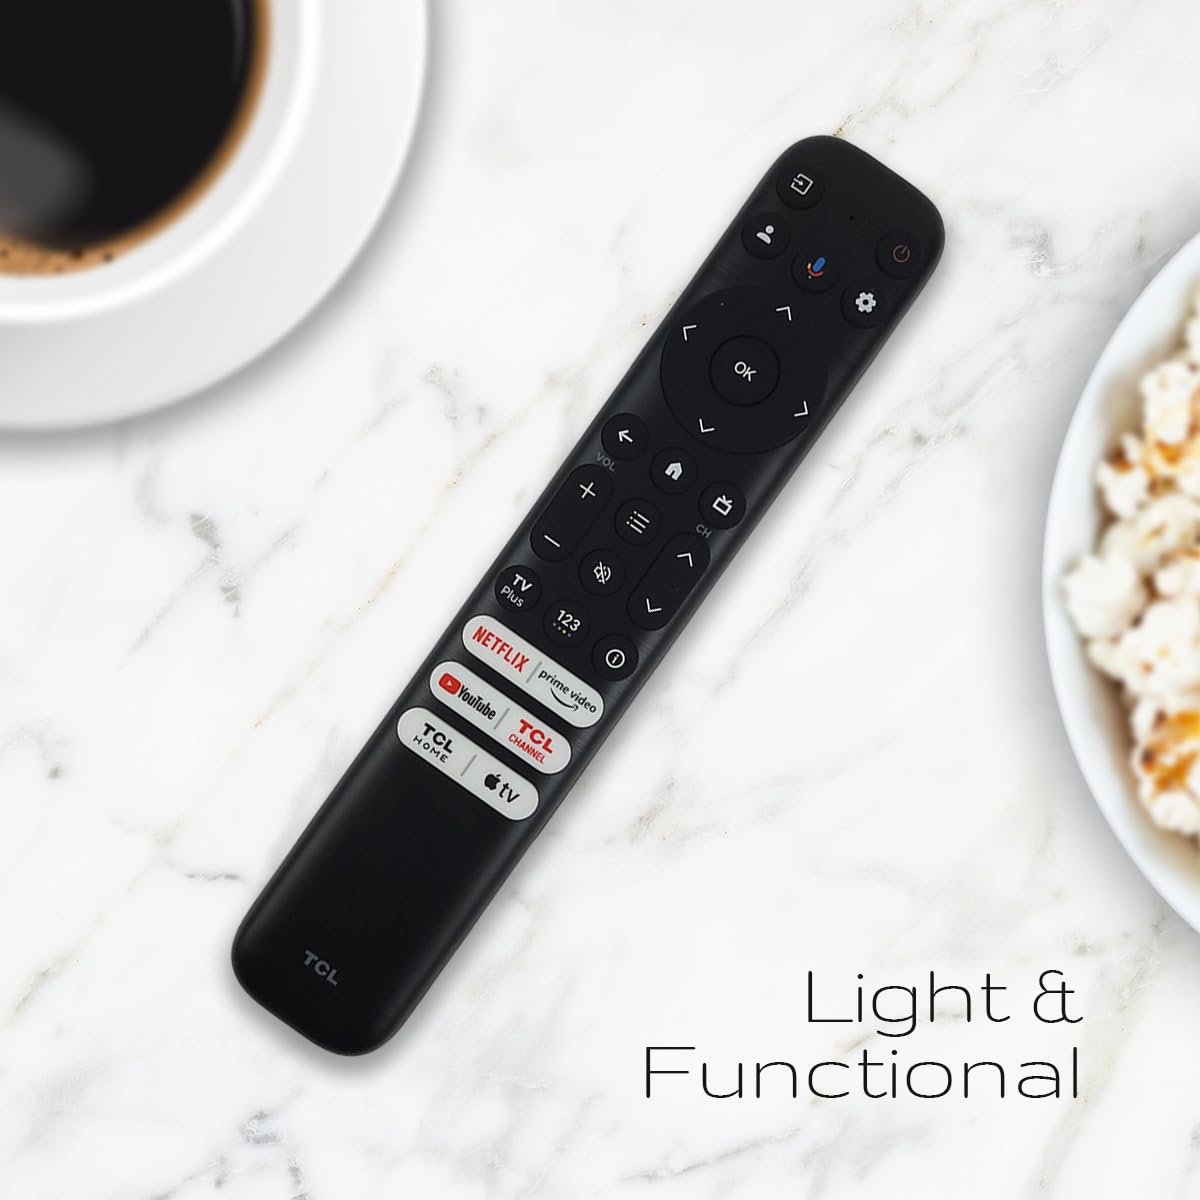 Ceybo OEM RC813 FMB1 Voice Remote Control fit for TCL QLED Smart TV, Works with Google Assistant, 55Q750G 43Q750G 65QM850G